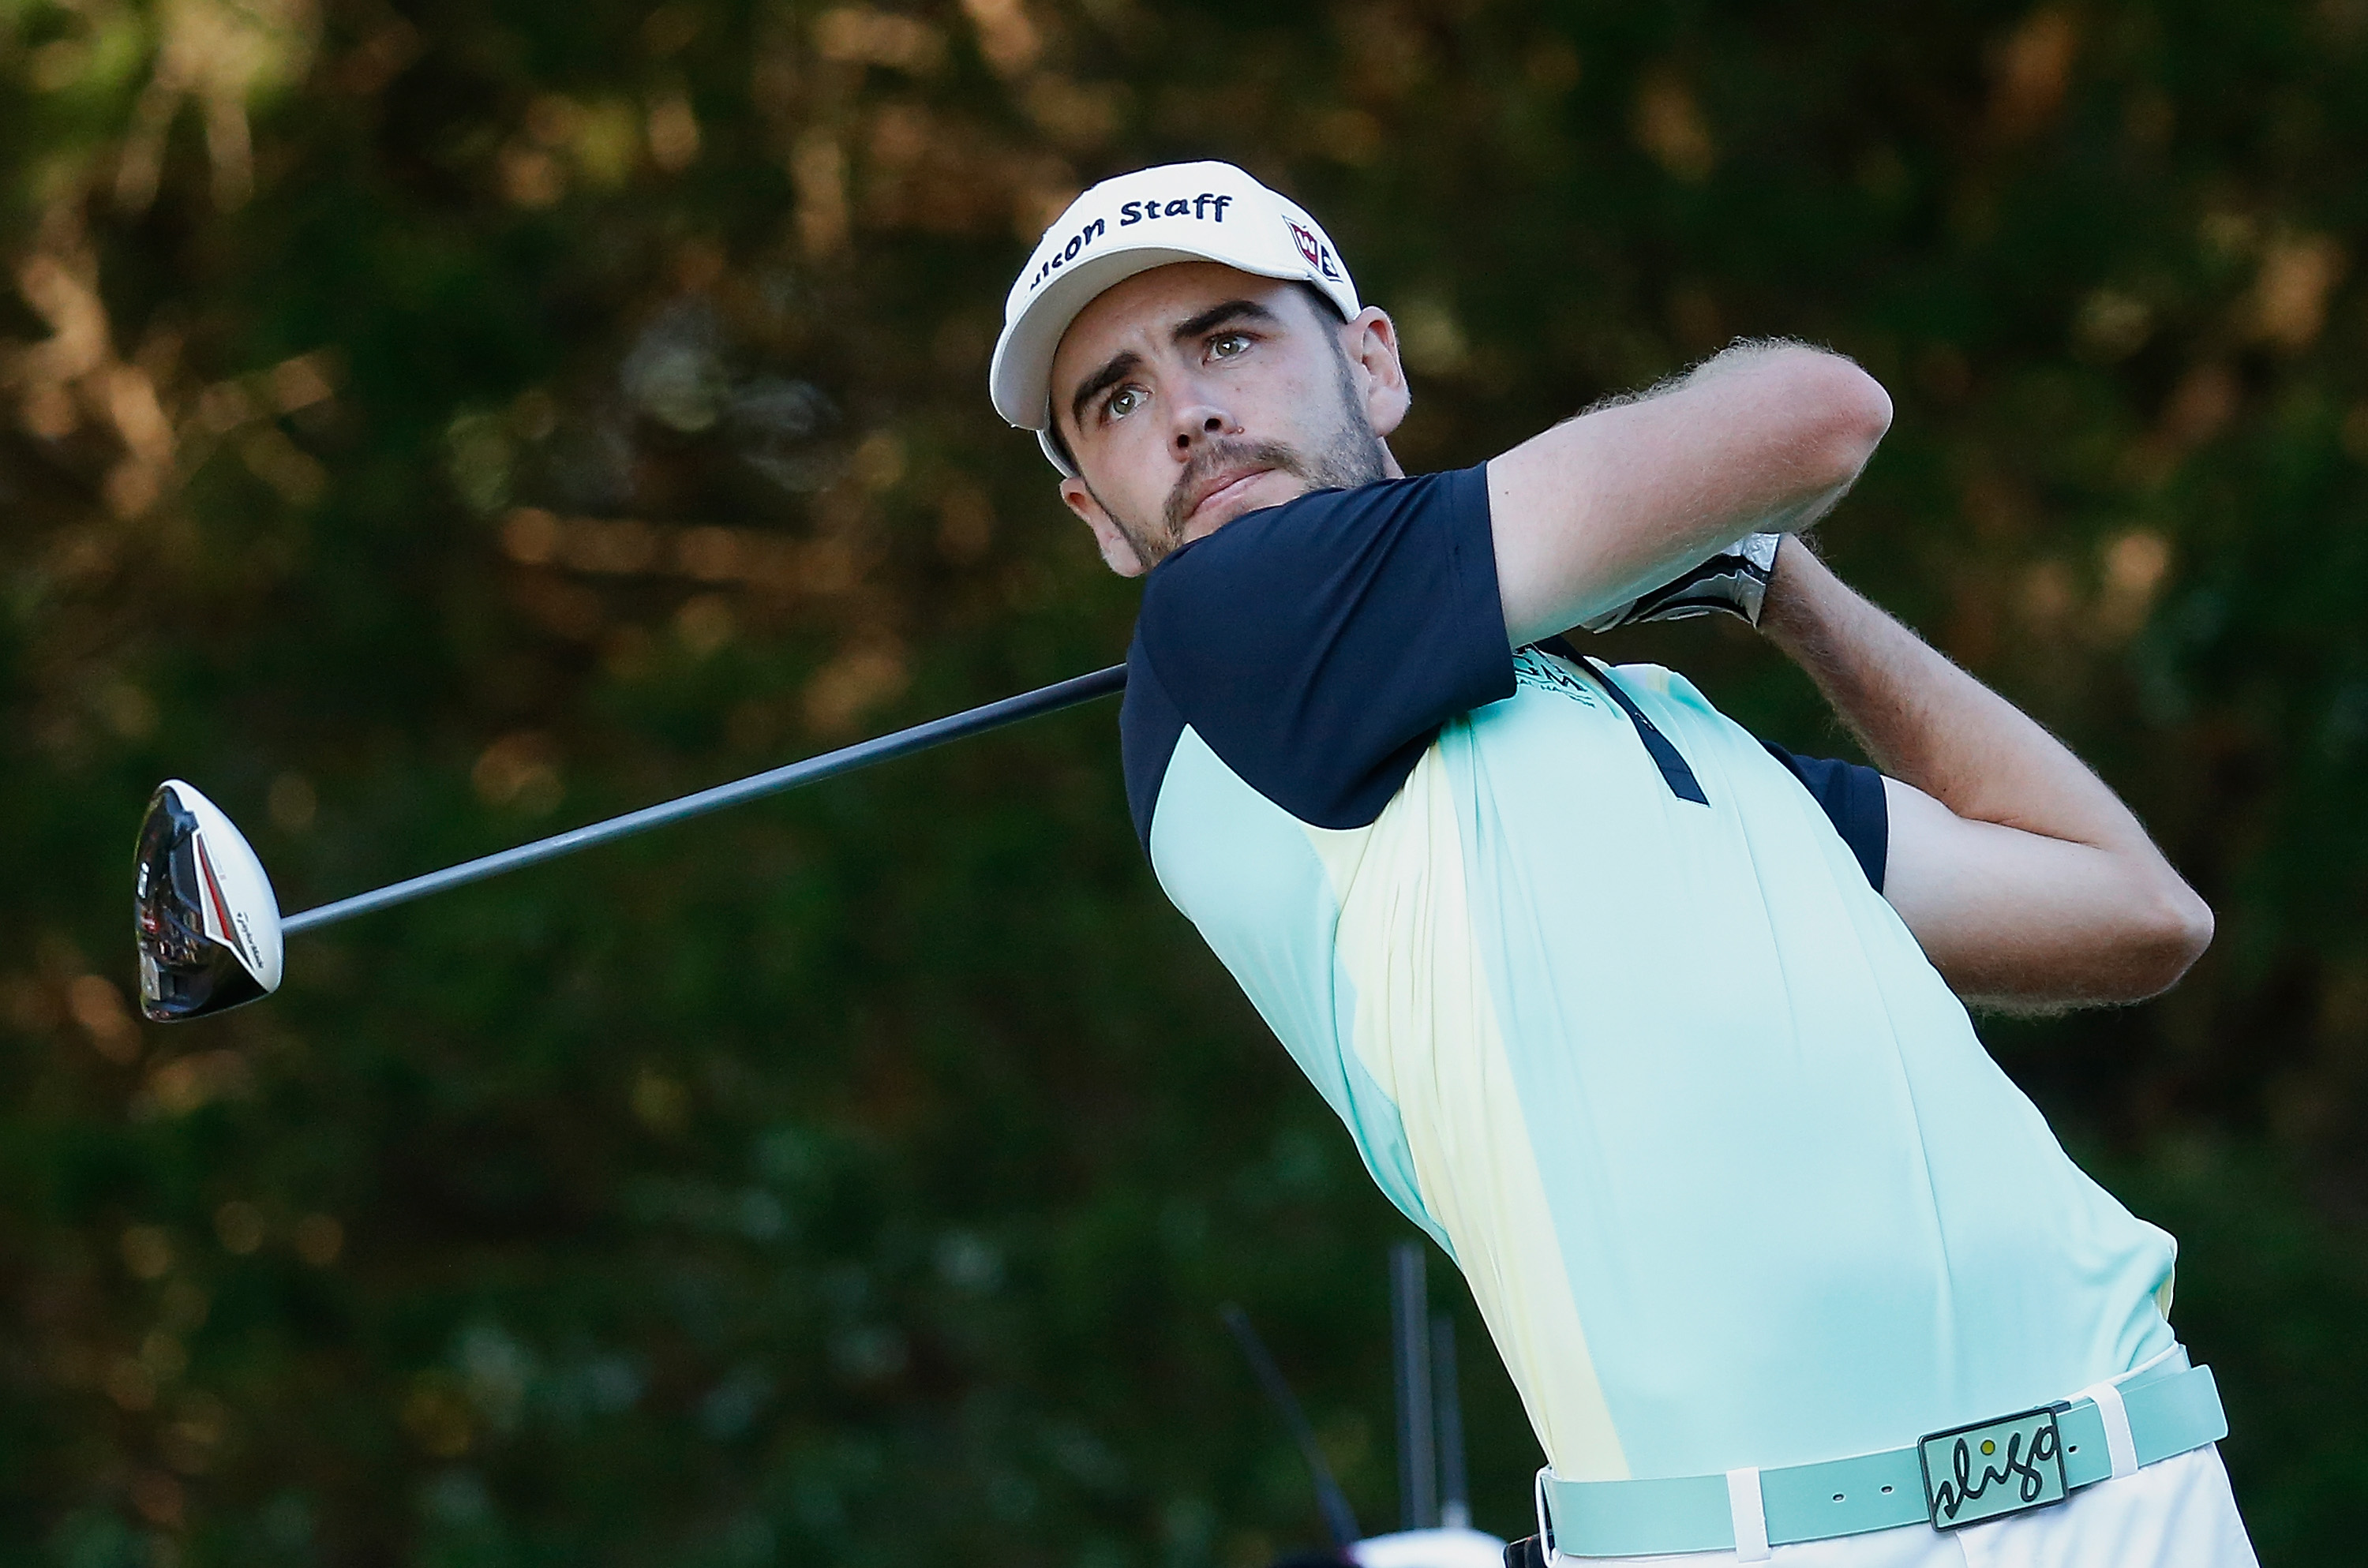 Merritt bagged a two iron and ditched the three iron in Virginia (Photo: Getty Images)